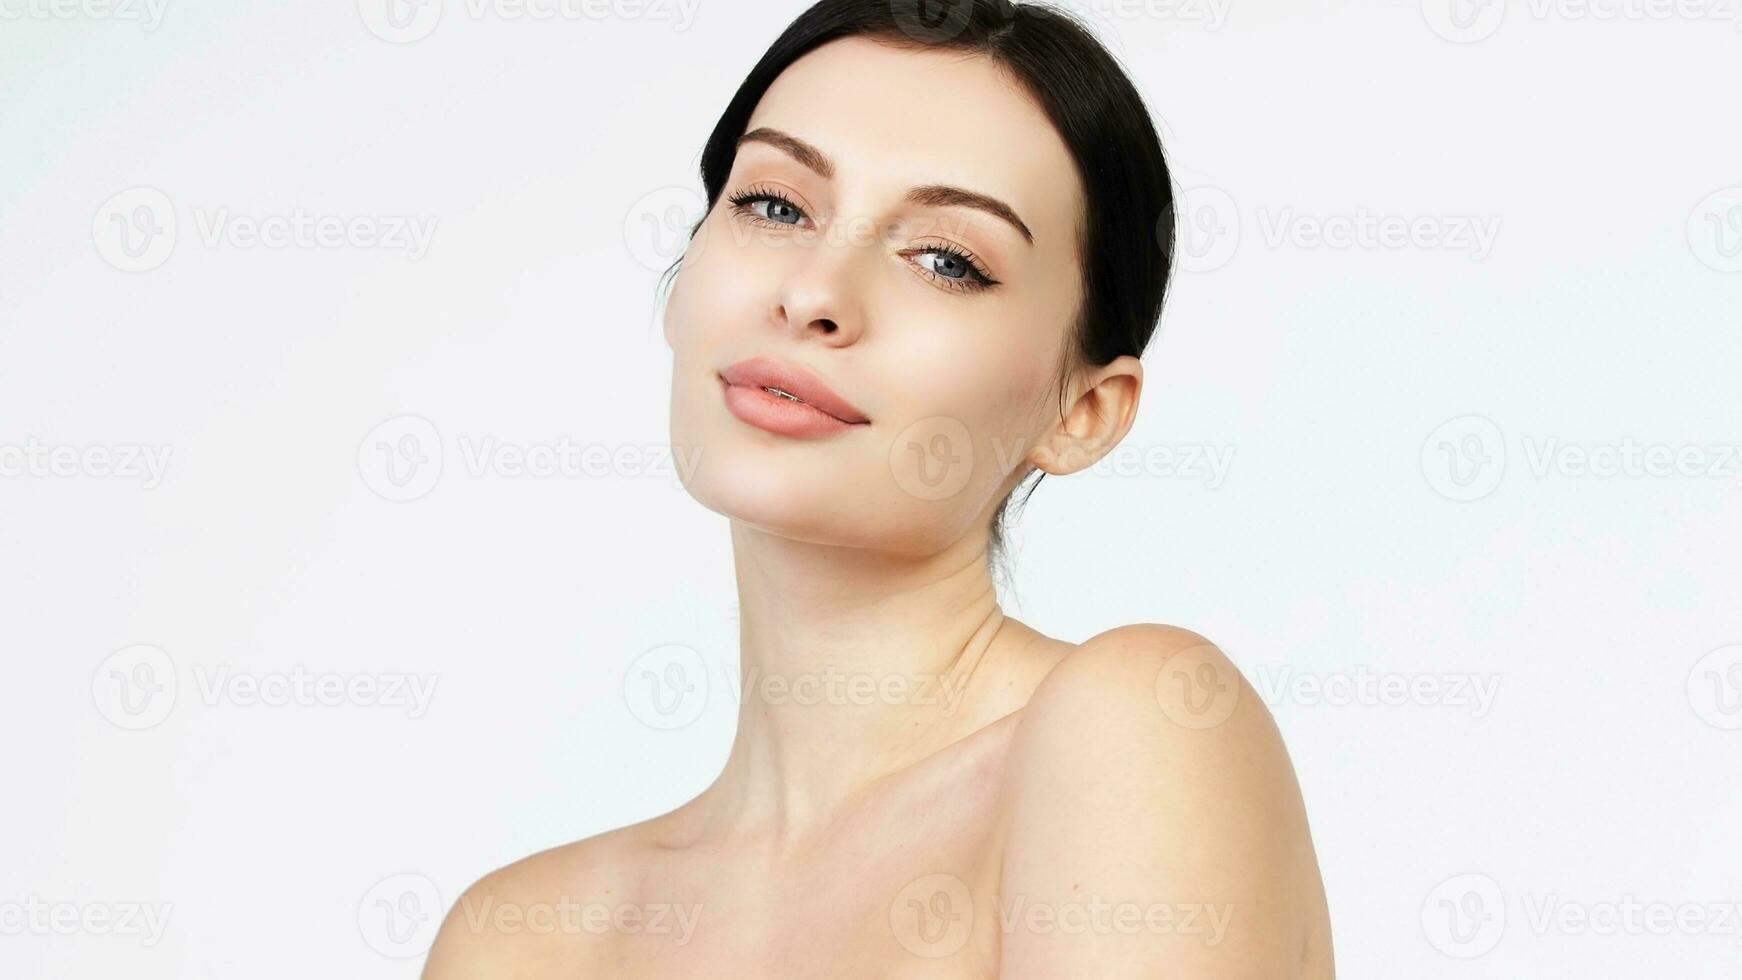 Close-up beauty portrait of young woman with smooth healthy skin, she gently touches her face with her fingers on light grey background and smiles. Skincare concept photo